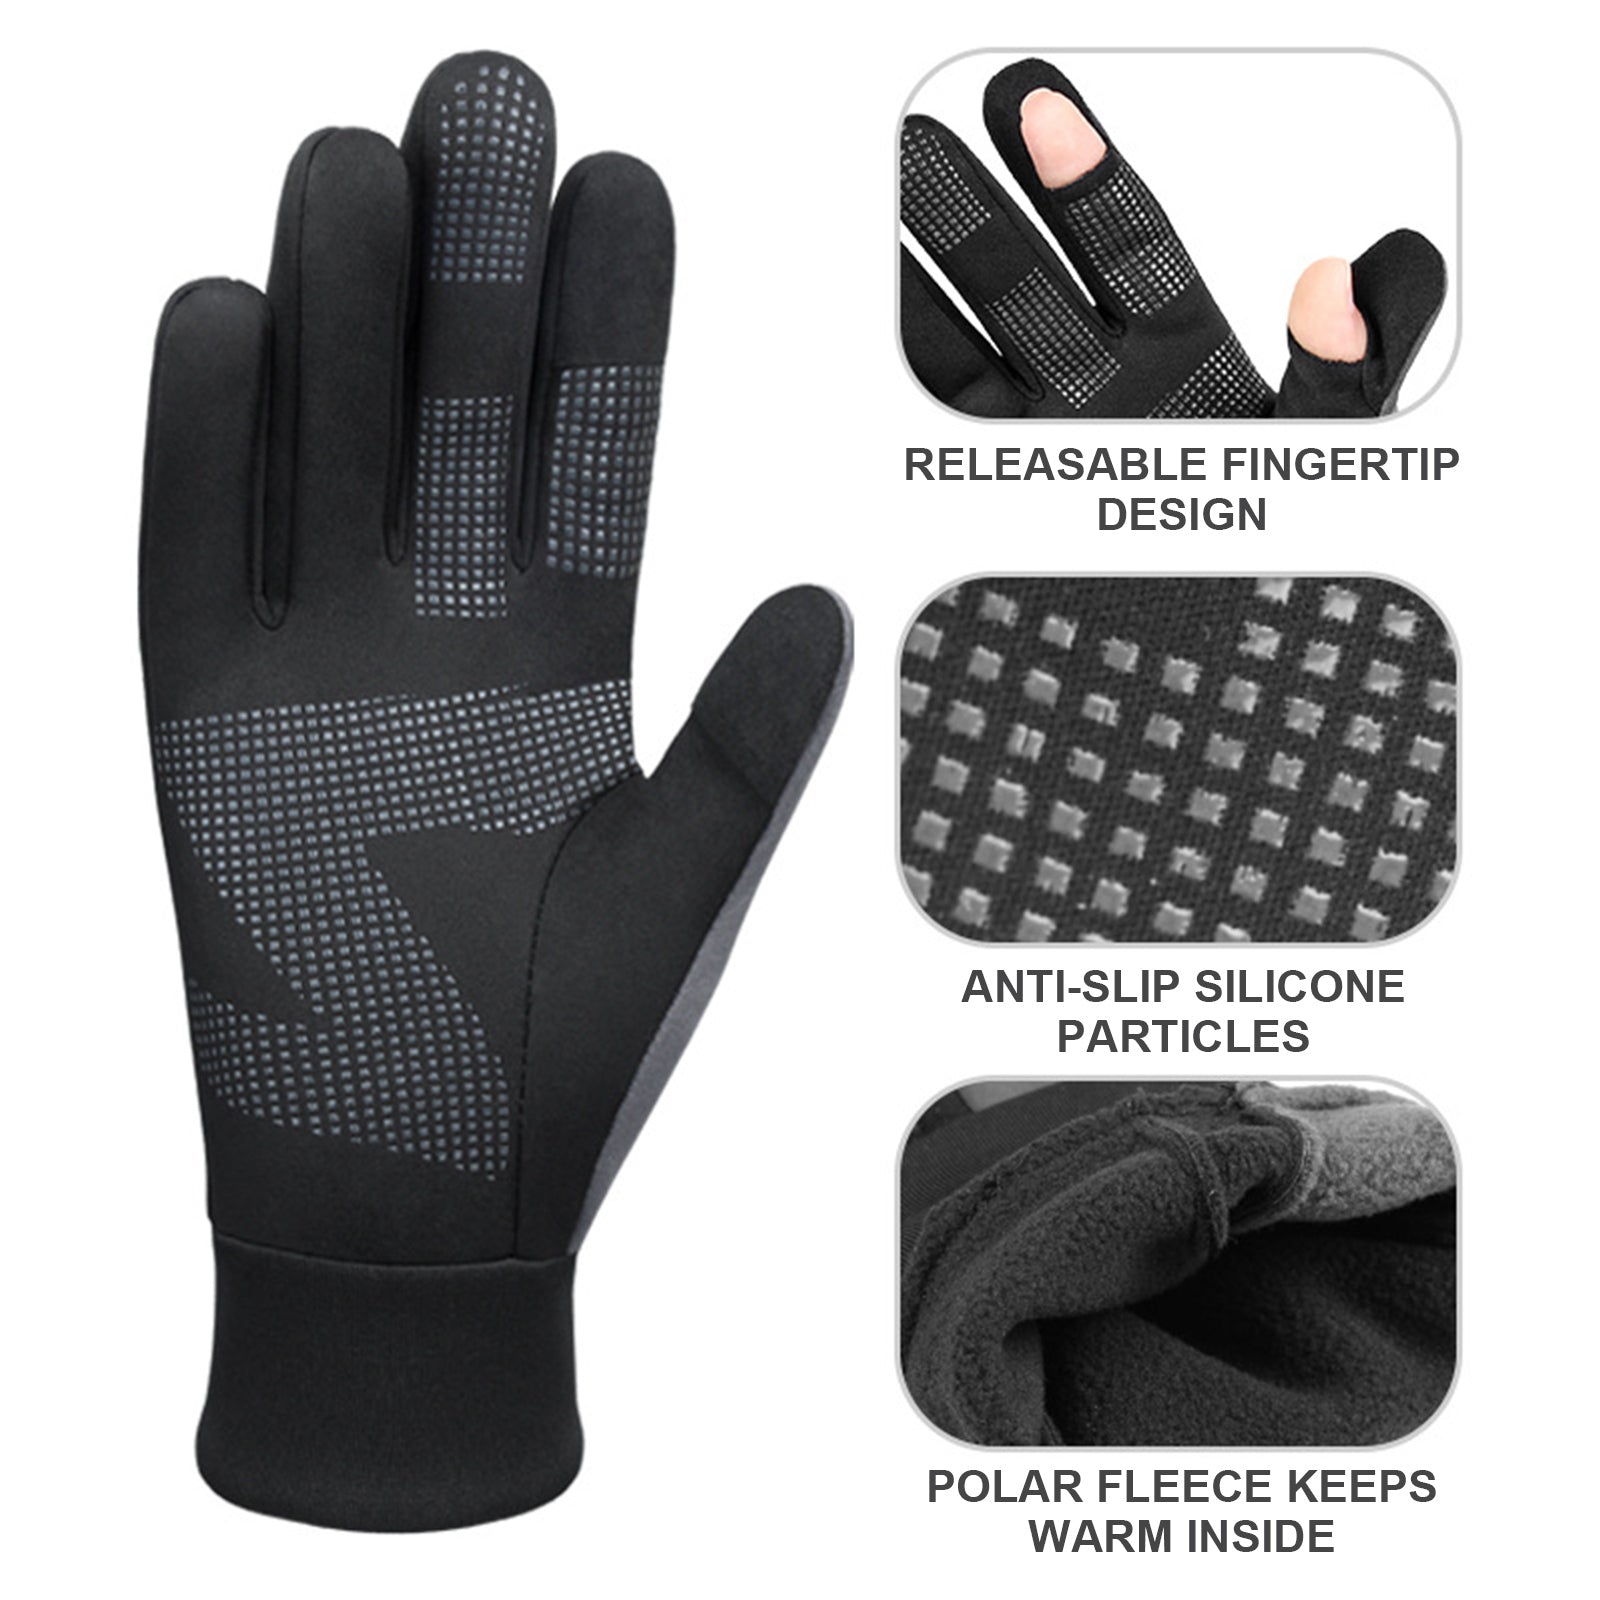 Winter Thermal Sports Gloves Touch Screen Waterproof Windproof Non-slip for Ski Riding Running Outdoor, S/M/L/XL